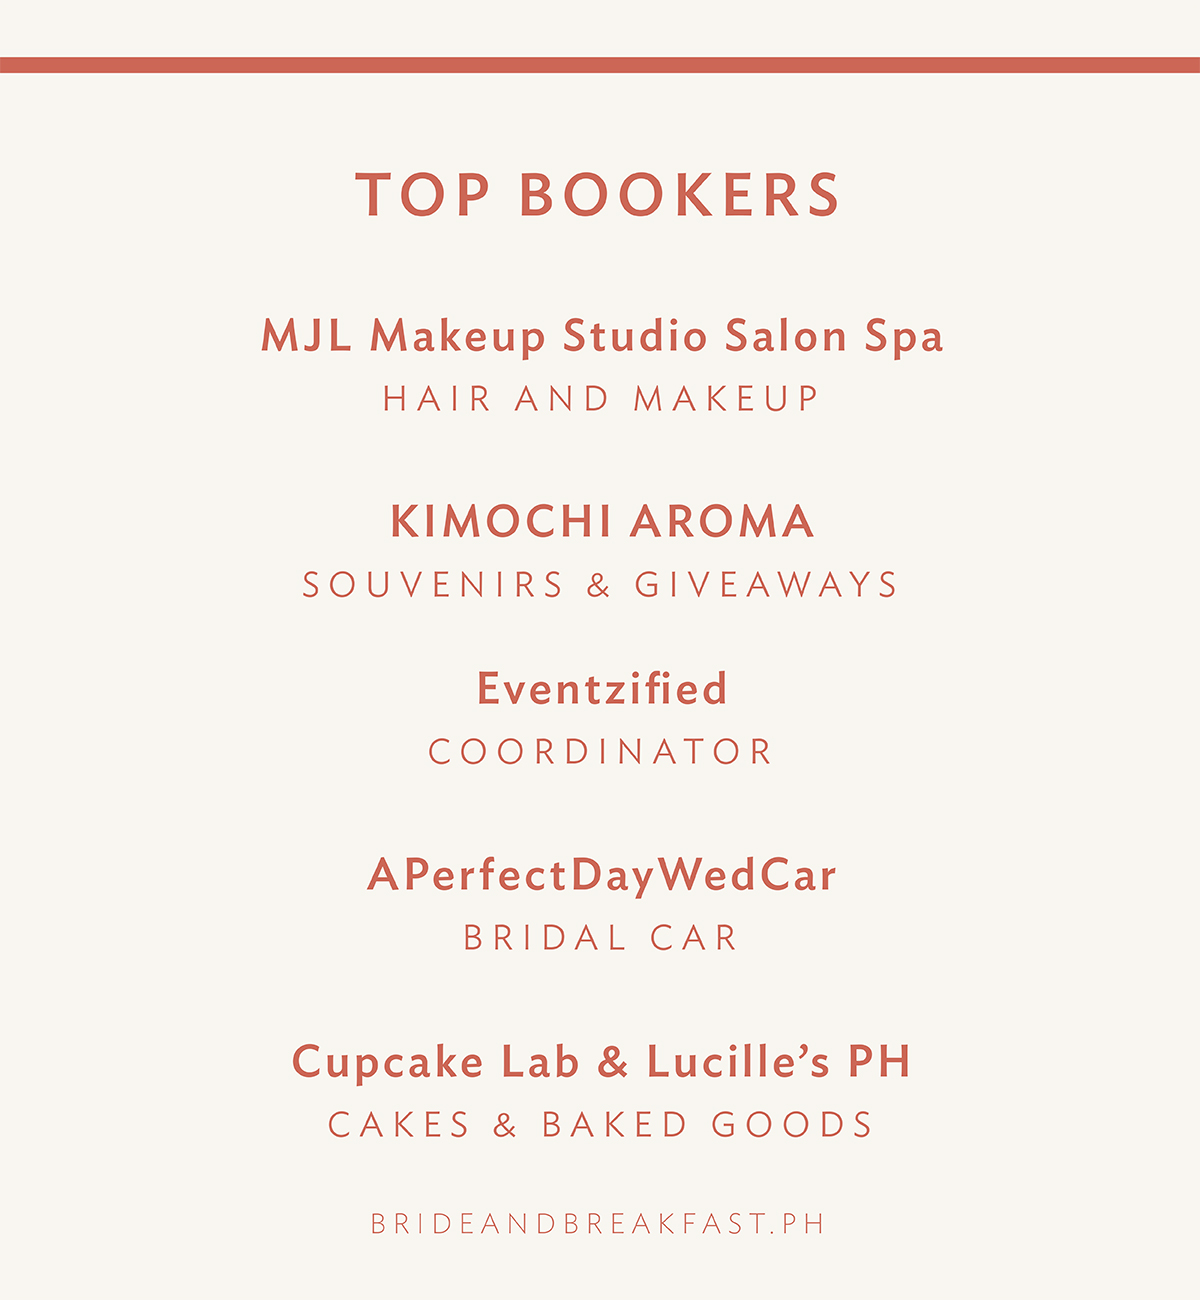 MJL Makeup Studio Salon Spa HAIR AND MAKEUP KIMOCHI AROMA SOUVENIRS & GIVEAWAYS Eventzified COORDINATOR APerfectDayWedCar BRIDAL CAR Cupcake Lab & Lucille’s PH CAKES AND BAKED GOODS